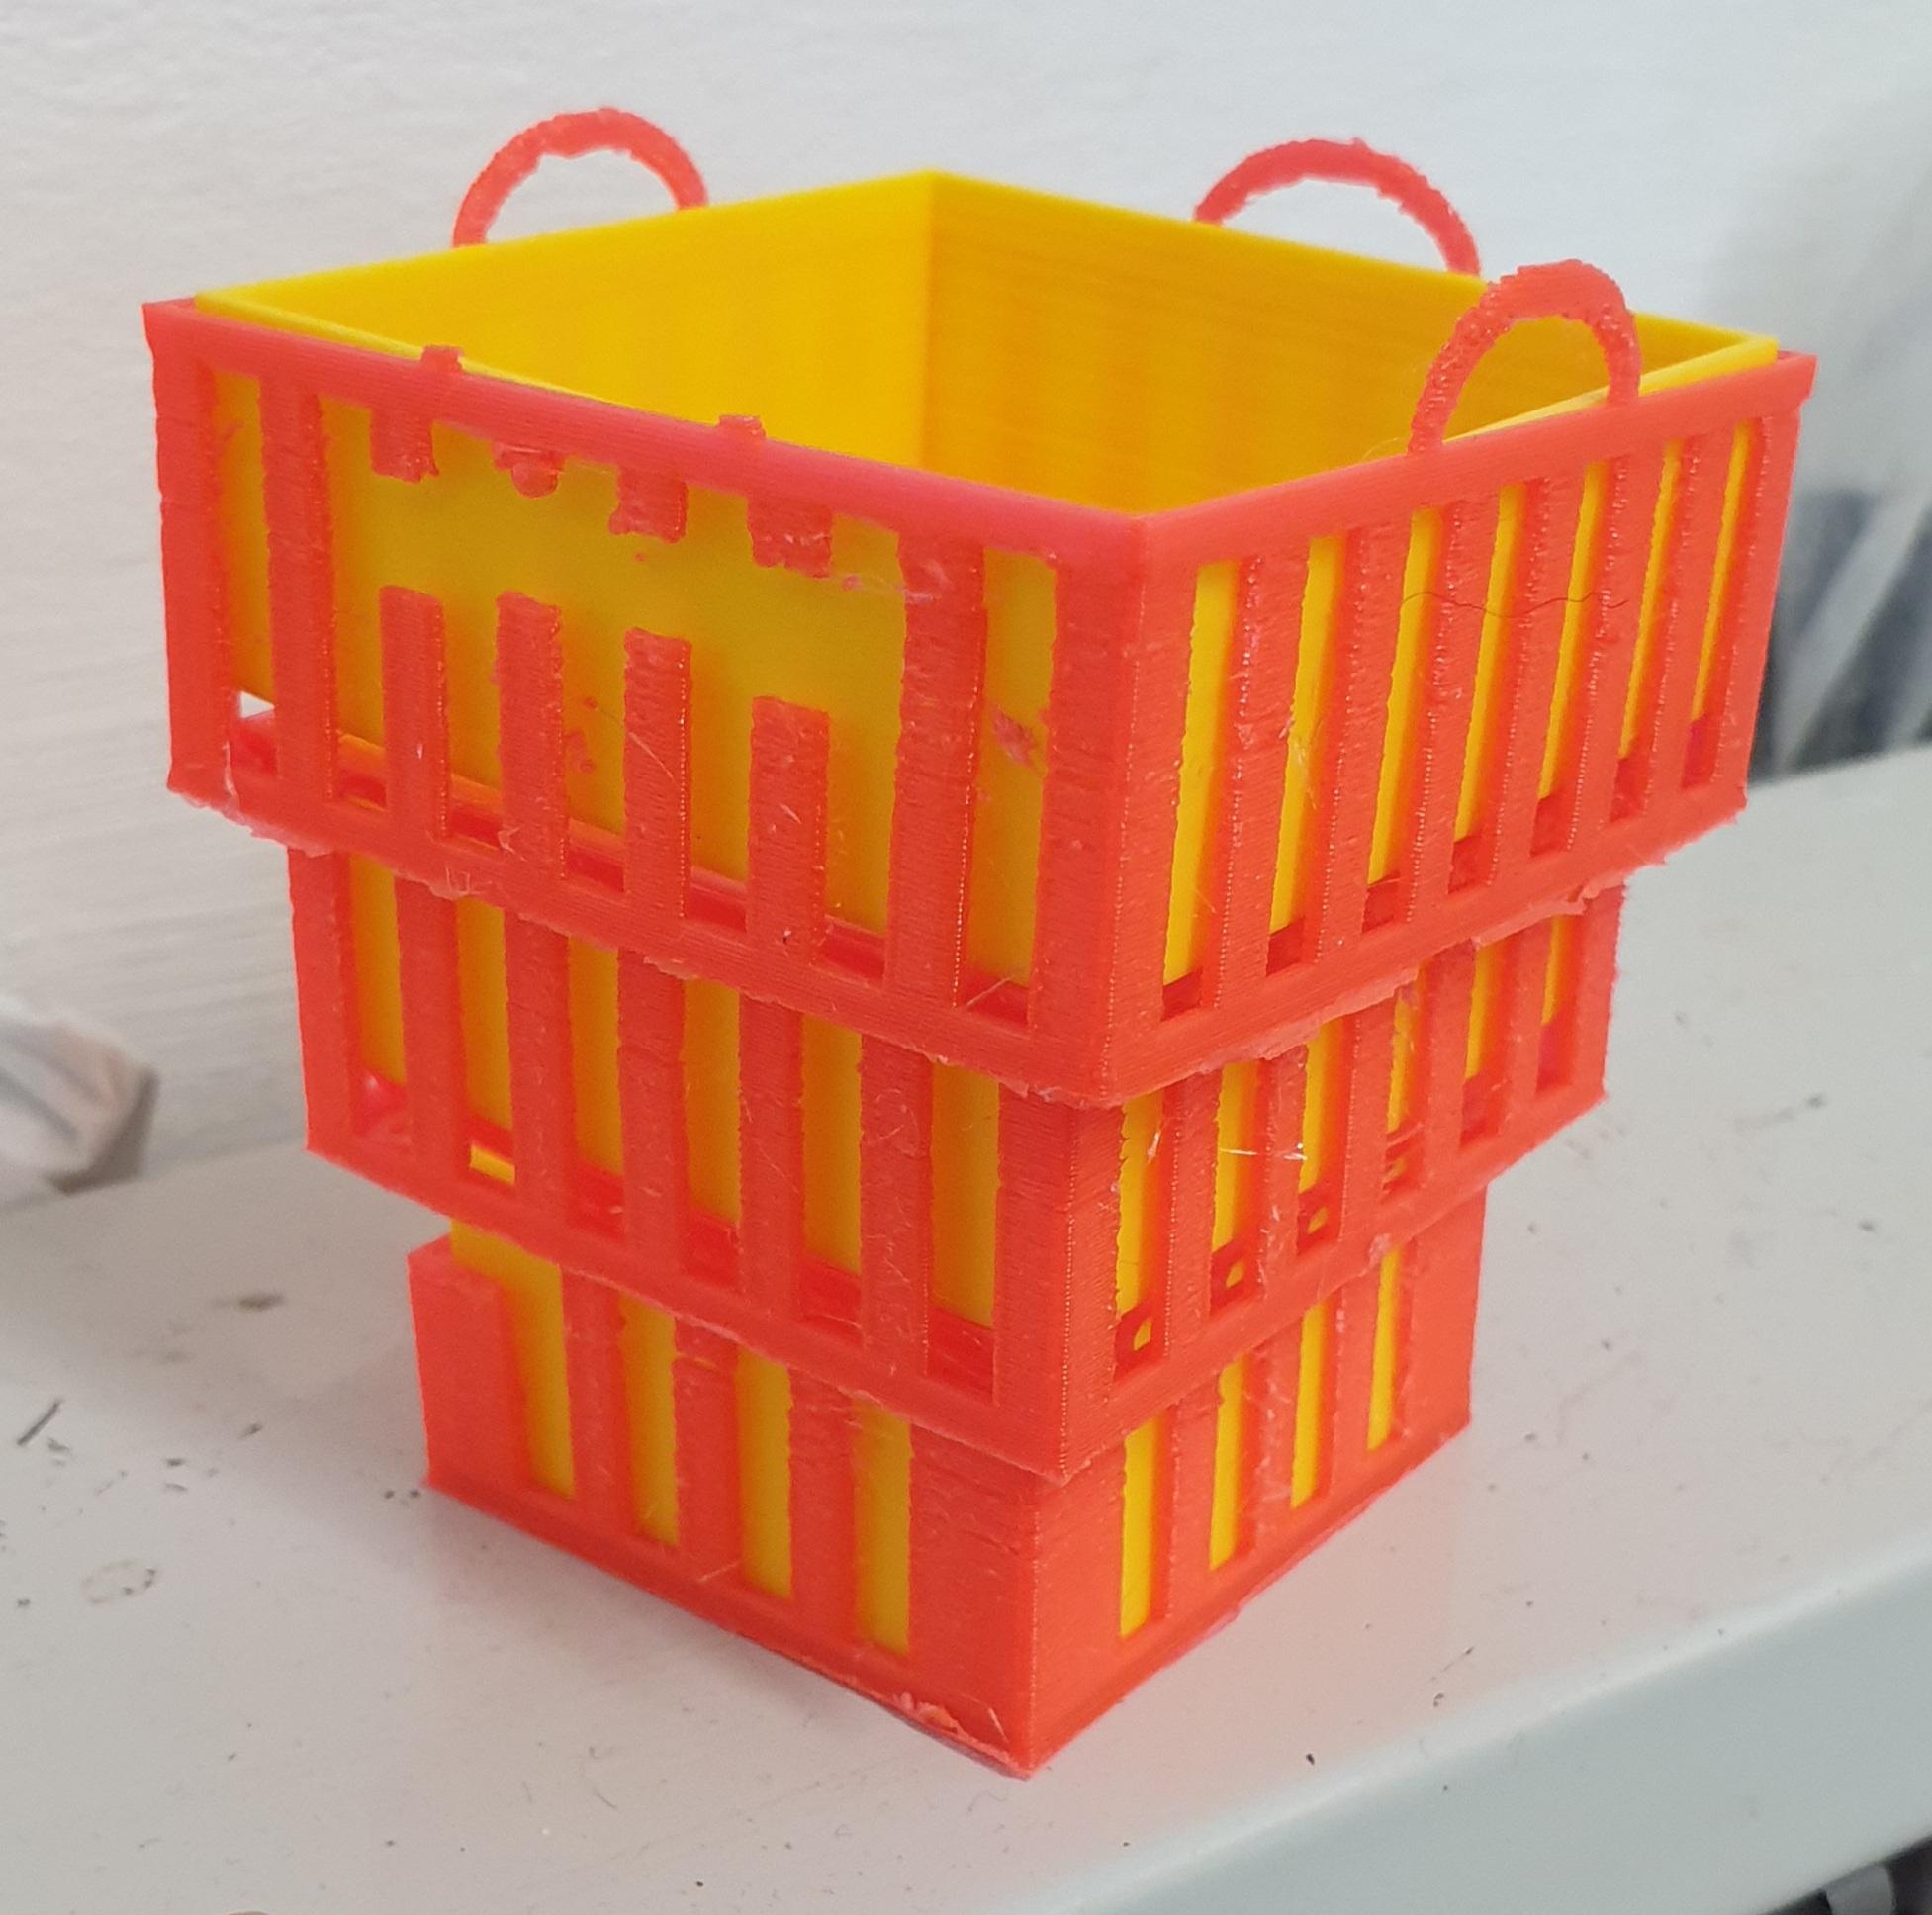 Chinese New Year Lantern Decoration - Bigger than I expected and fits together great. My first ever use of PETG was not a success though and no reflection of the model! - 3d model